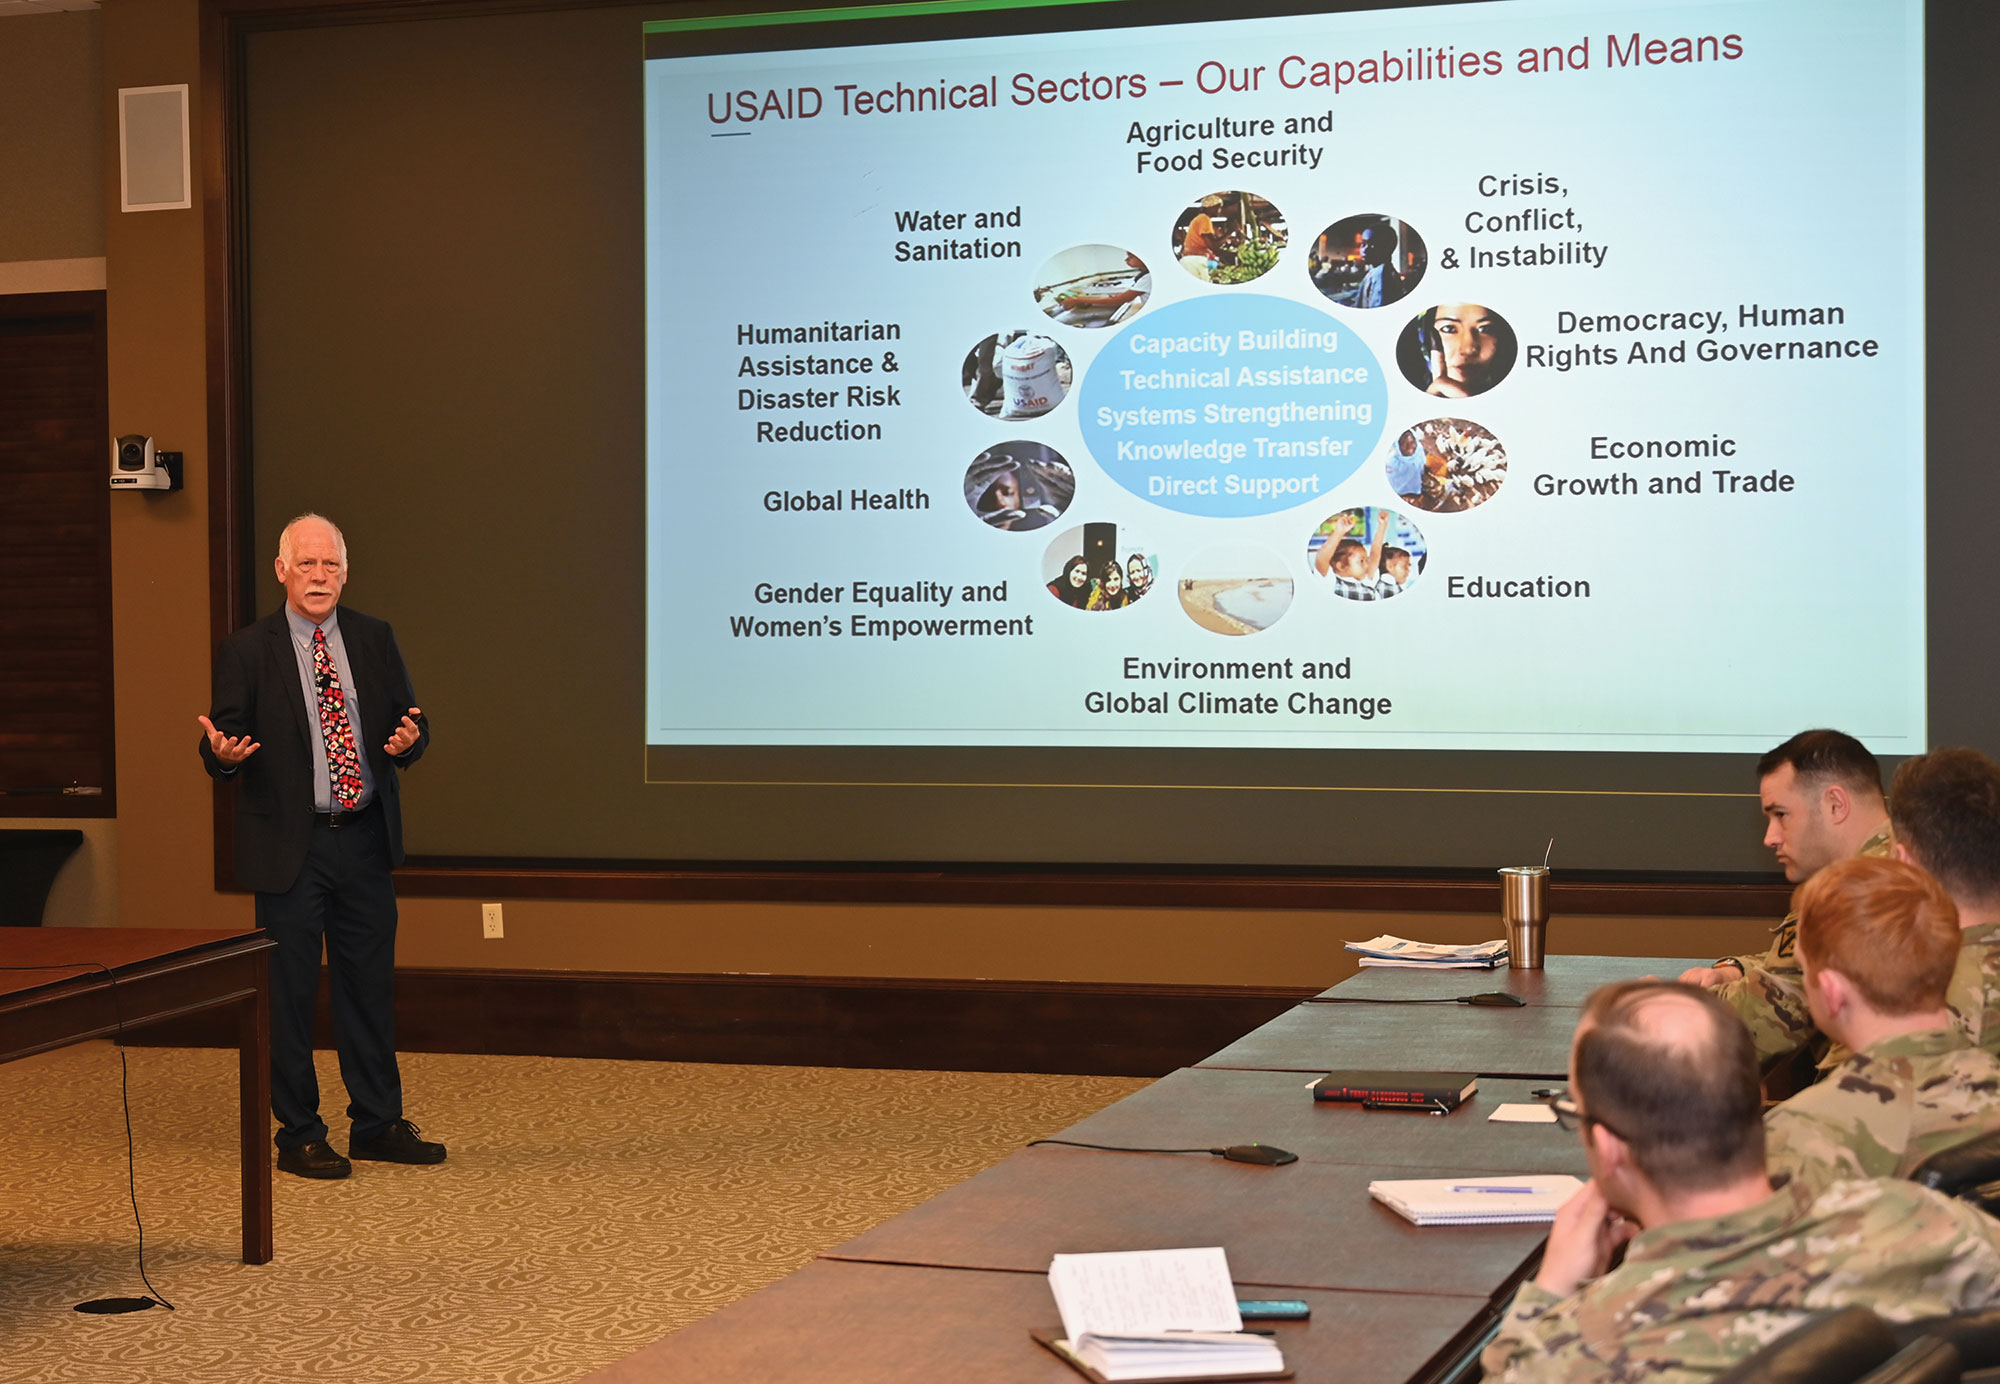 Dr. Mark Sorensen, the CGSC Distinguished Chair for Development Studies, leads a discussion on the U.S. Agency for International Development (USAID) during the InterAgency Brown-Bag Lecture on Dec. 13, 2022, in the Arnold Conference Room of the Lewis and Clark Center on Fort Leavenworth.